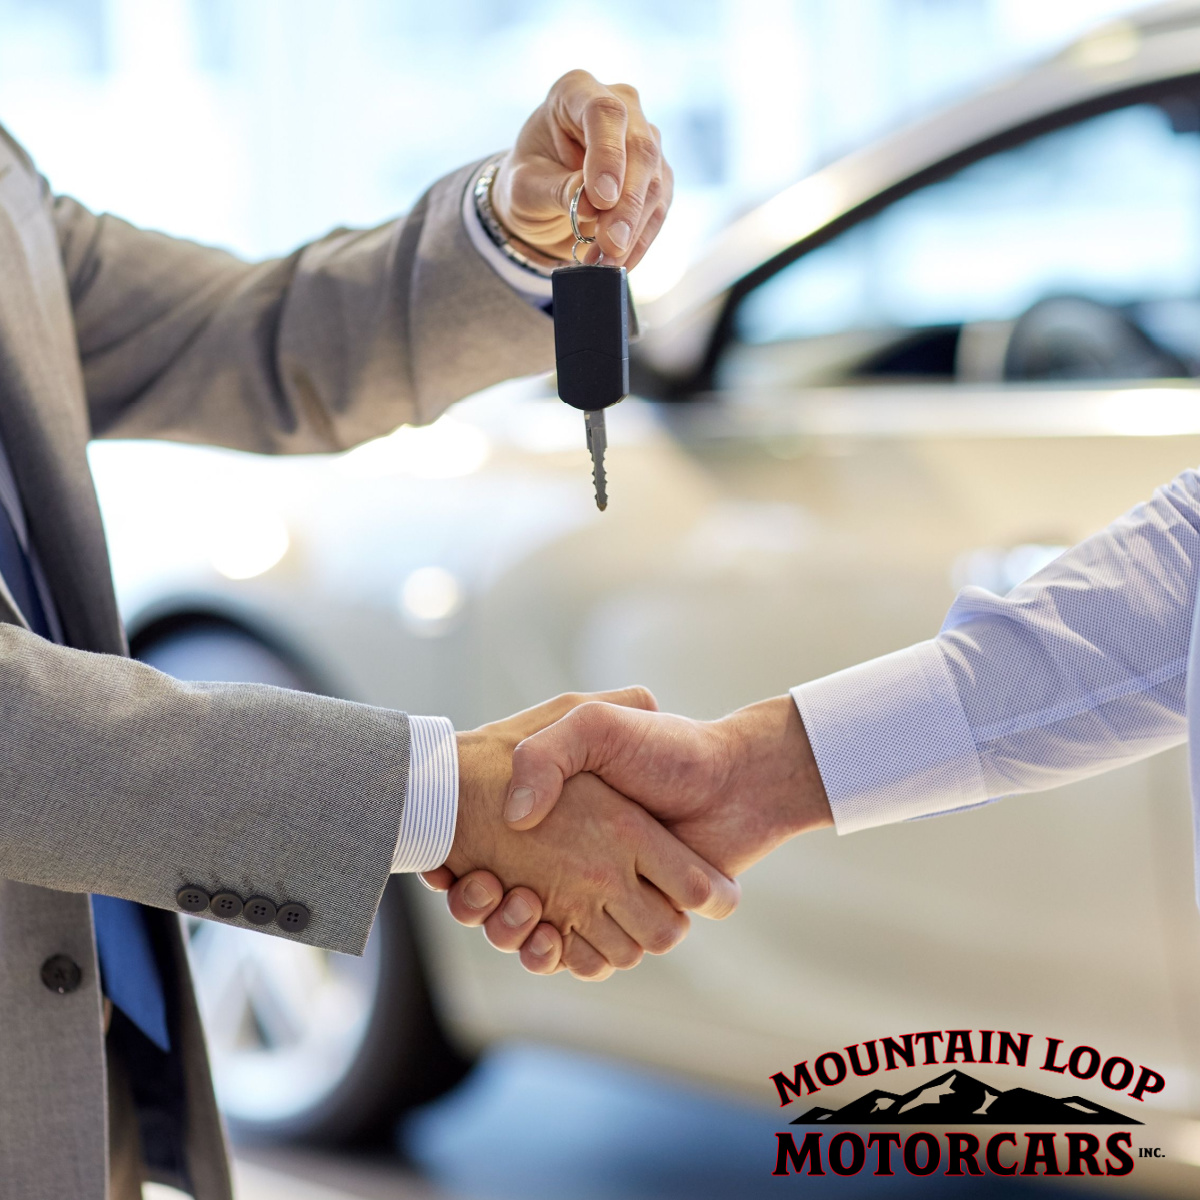 Discover the Benefits of Choosing Mountain Loop Motorcars as Your Dealership